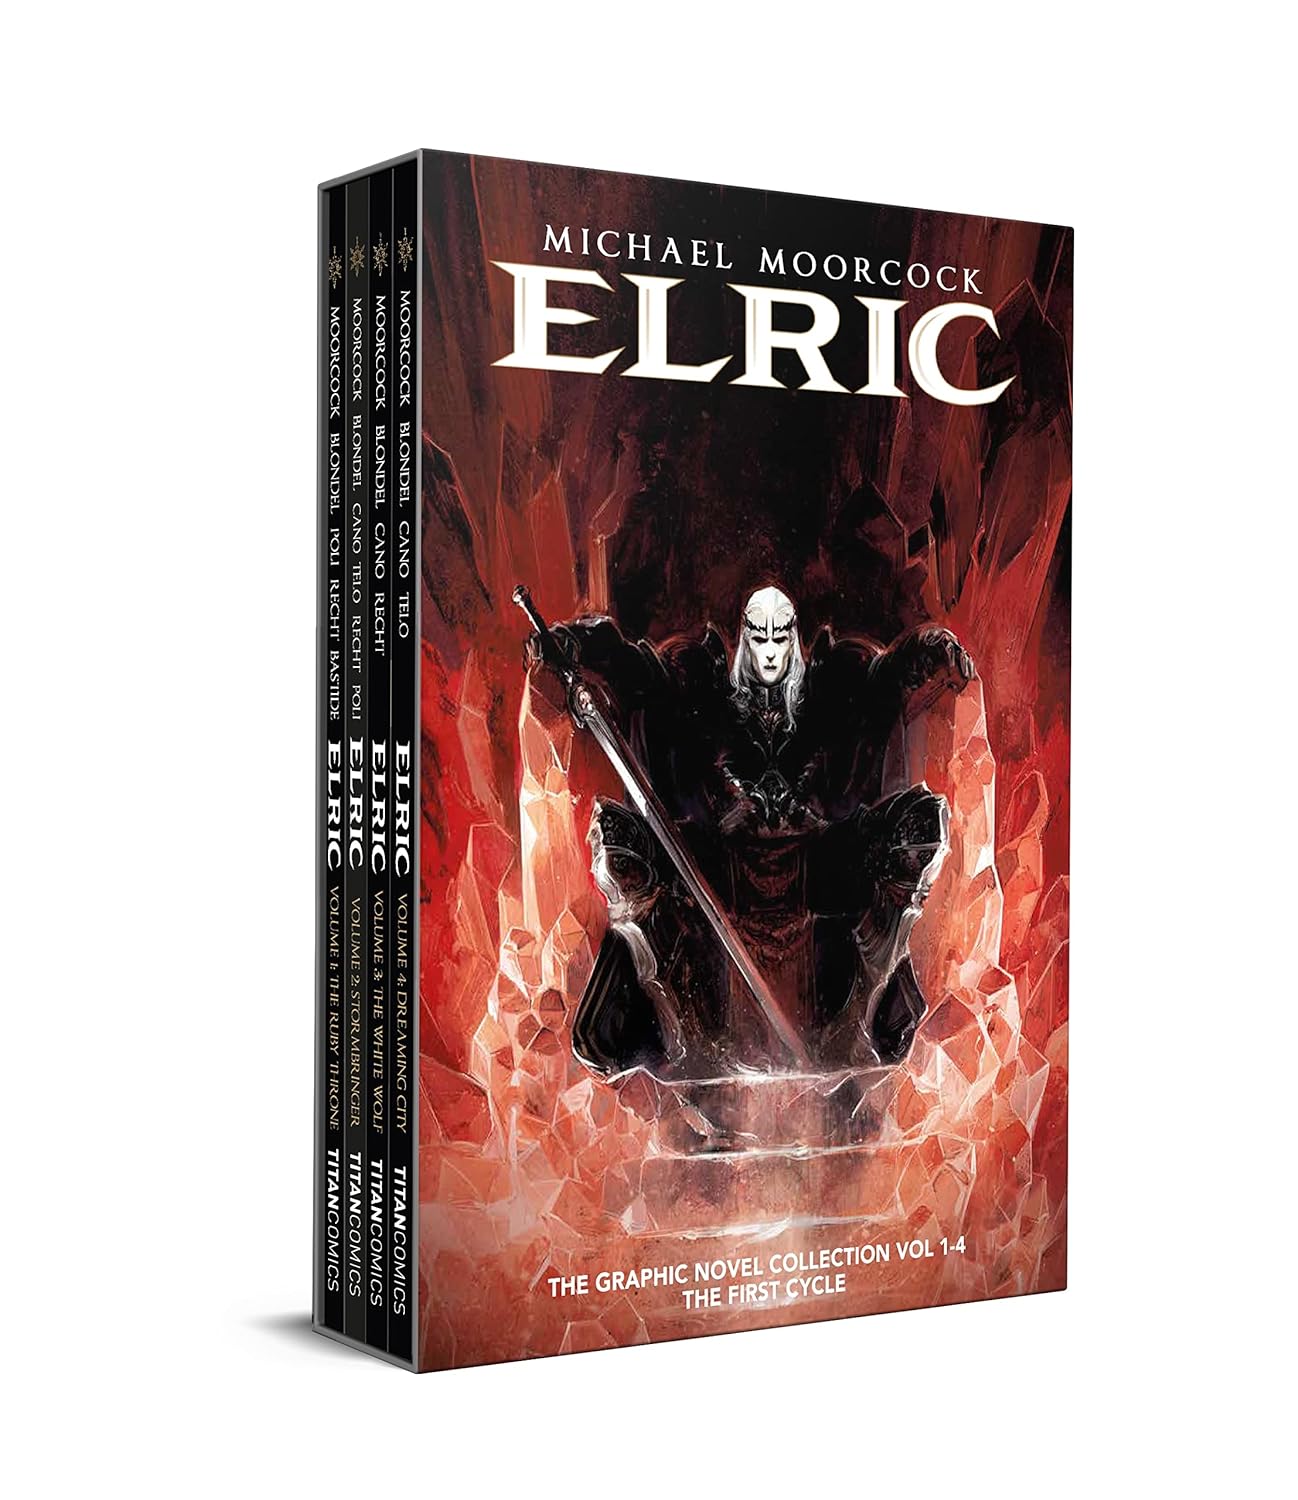 Elric of Melniboné, by Michael Moorcock